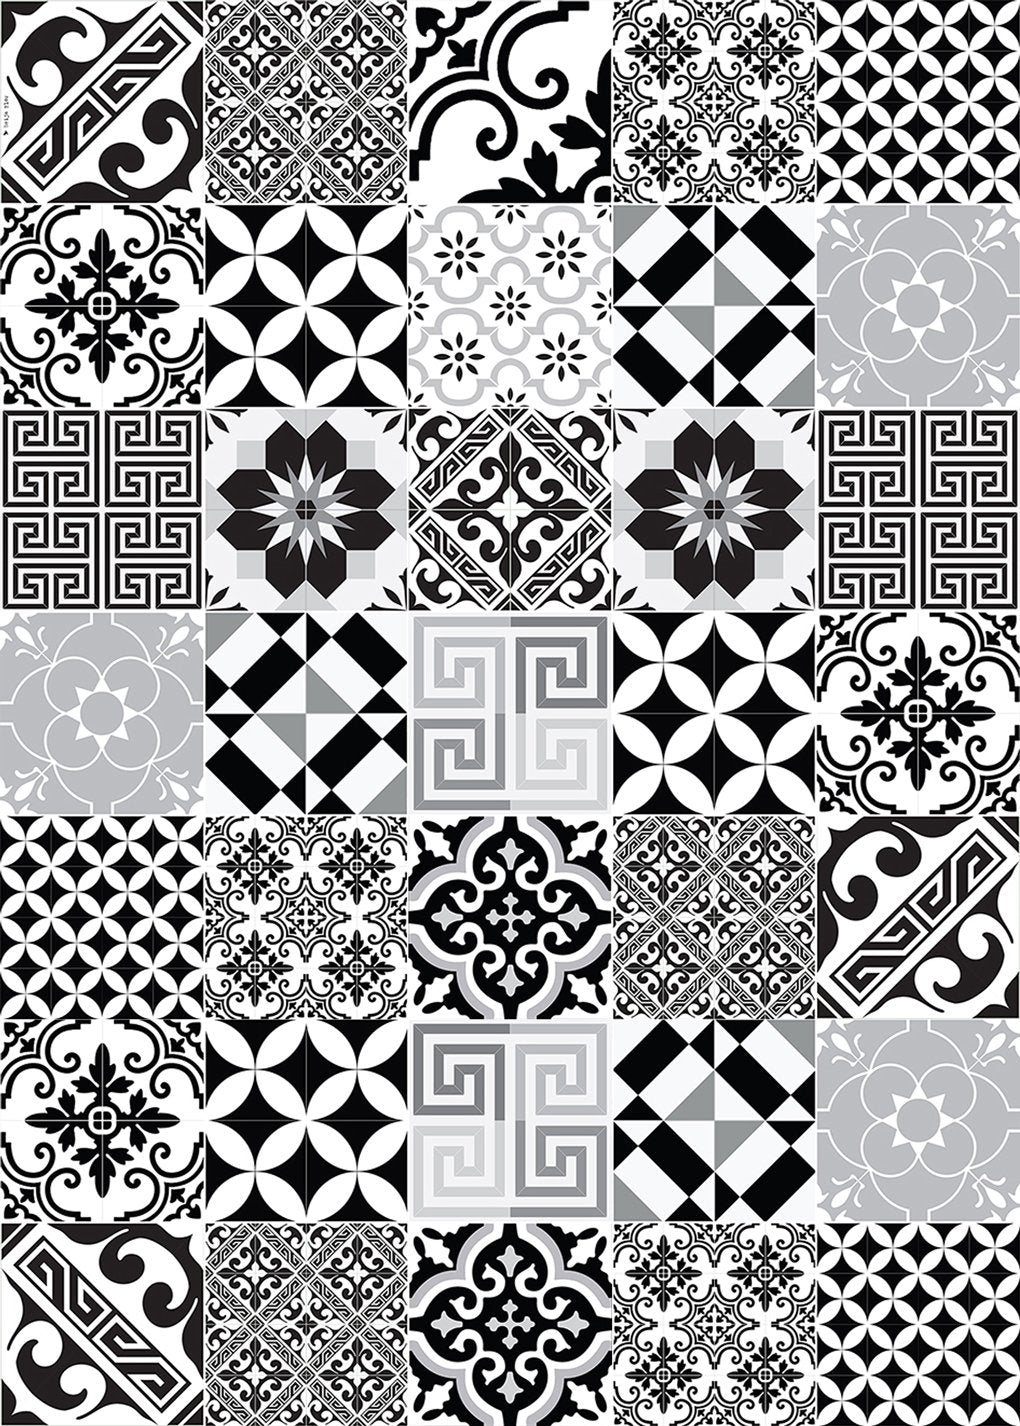 Beija Flor Black and White Eclectic Floor Mat (Buy 2 Get 1 Free!) Wide (39" x 55") Rugs Beija Flor Brand_Beija Flor Classic Tile CLEAN OUT SALE Home_Decor Home_Floor Mats e9-w_49d1f9f1-90ad-43ae-bd98-22ba39a23670